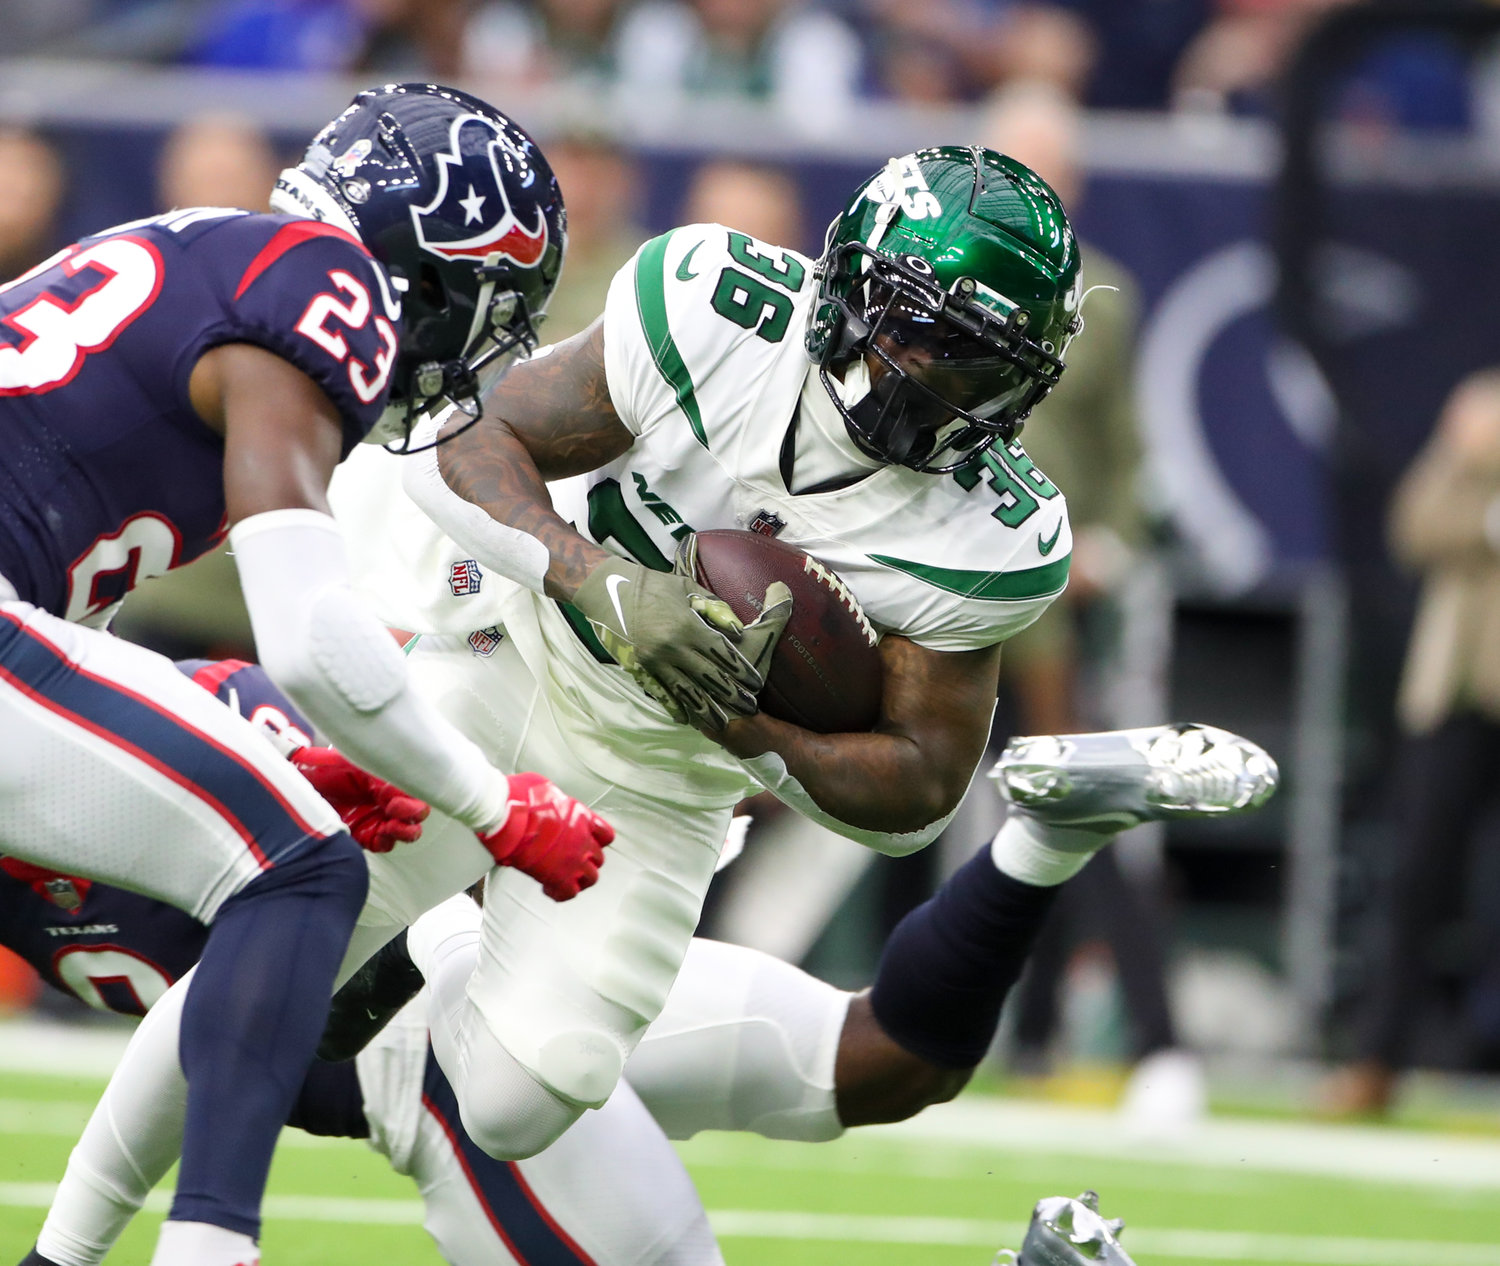 New York Jets running back Austin Walter (36) carries the ball during an NFL game between the Houston Texans and the New York Jets on November 28, 2021 in Houston, Texas. The Jets won, 21-14